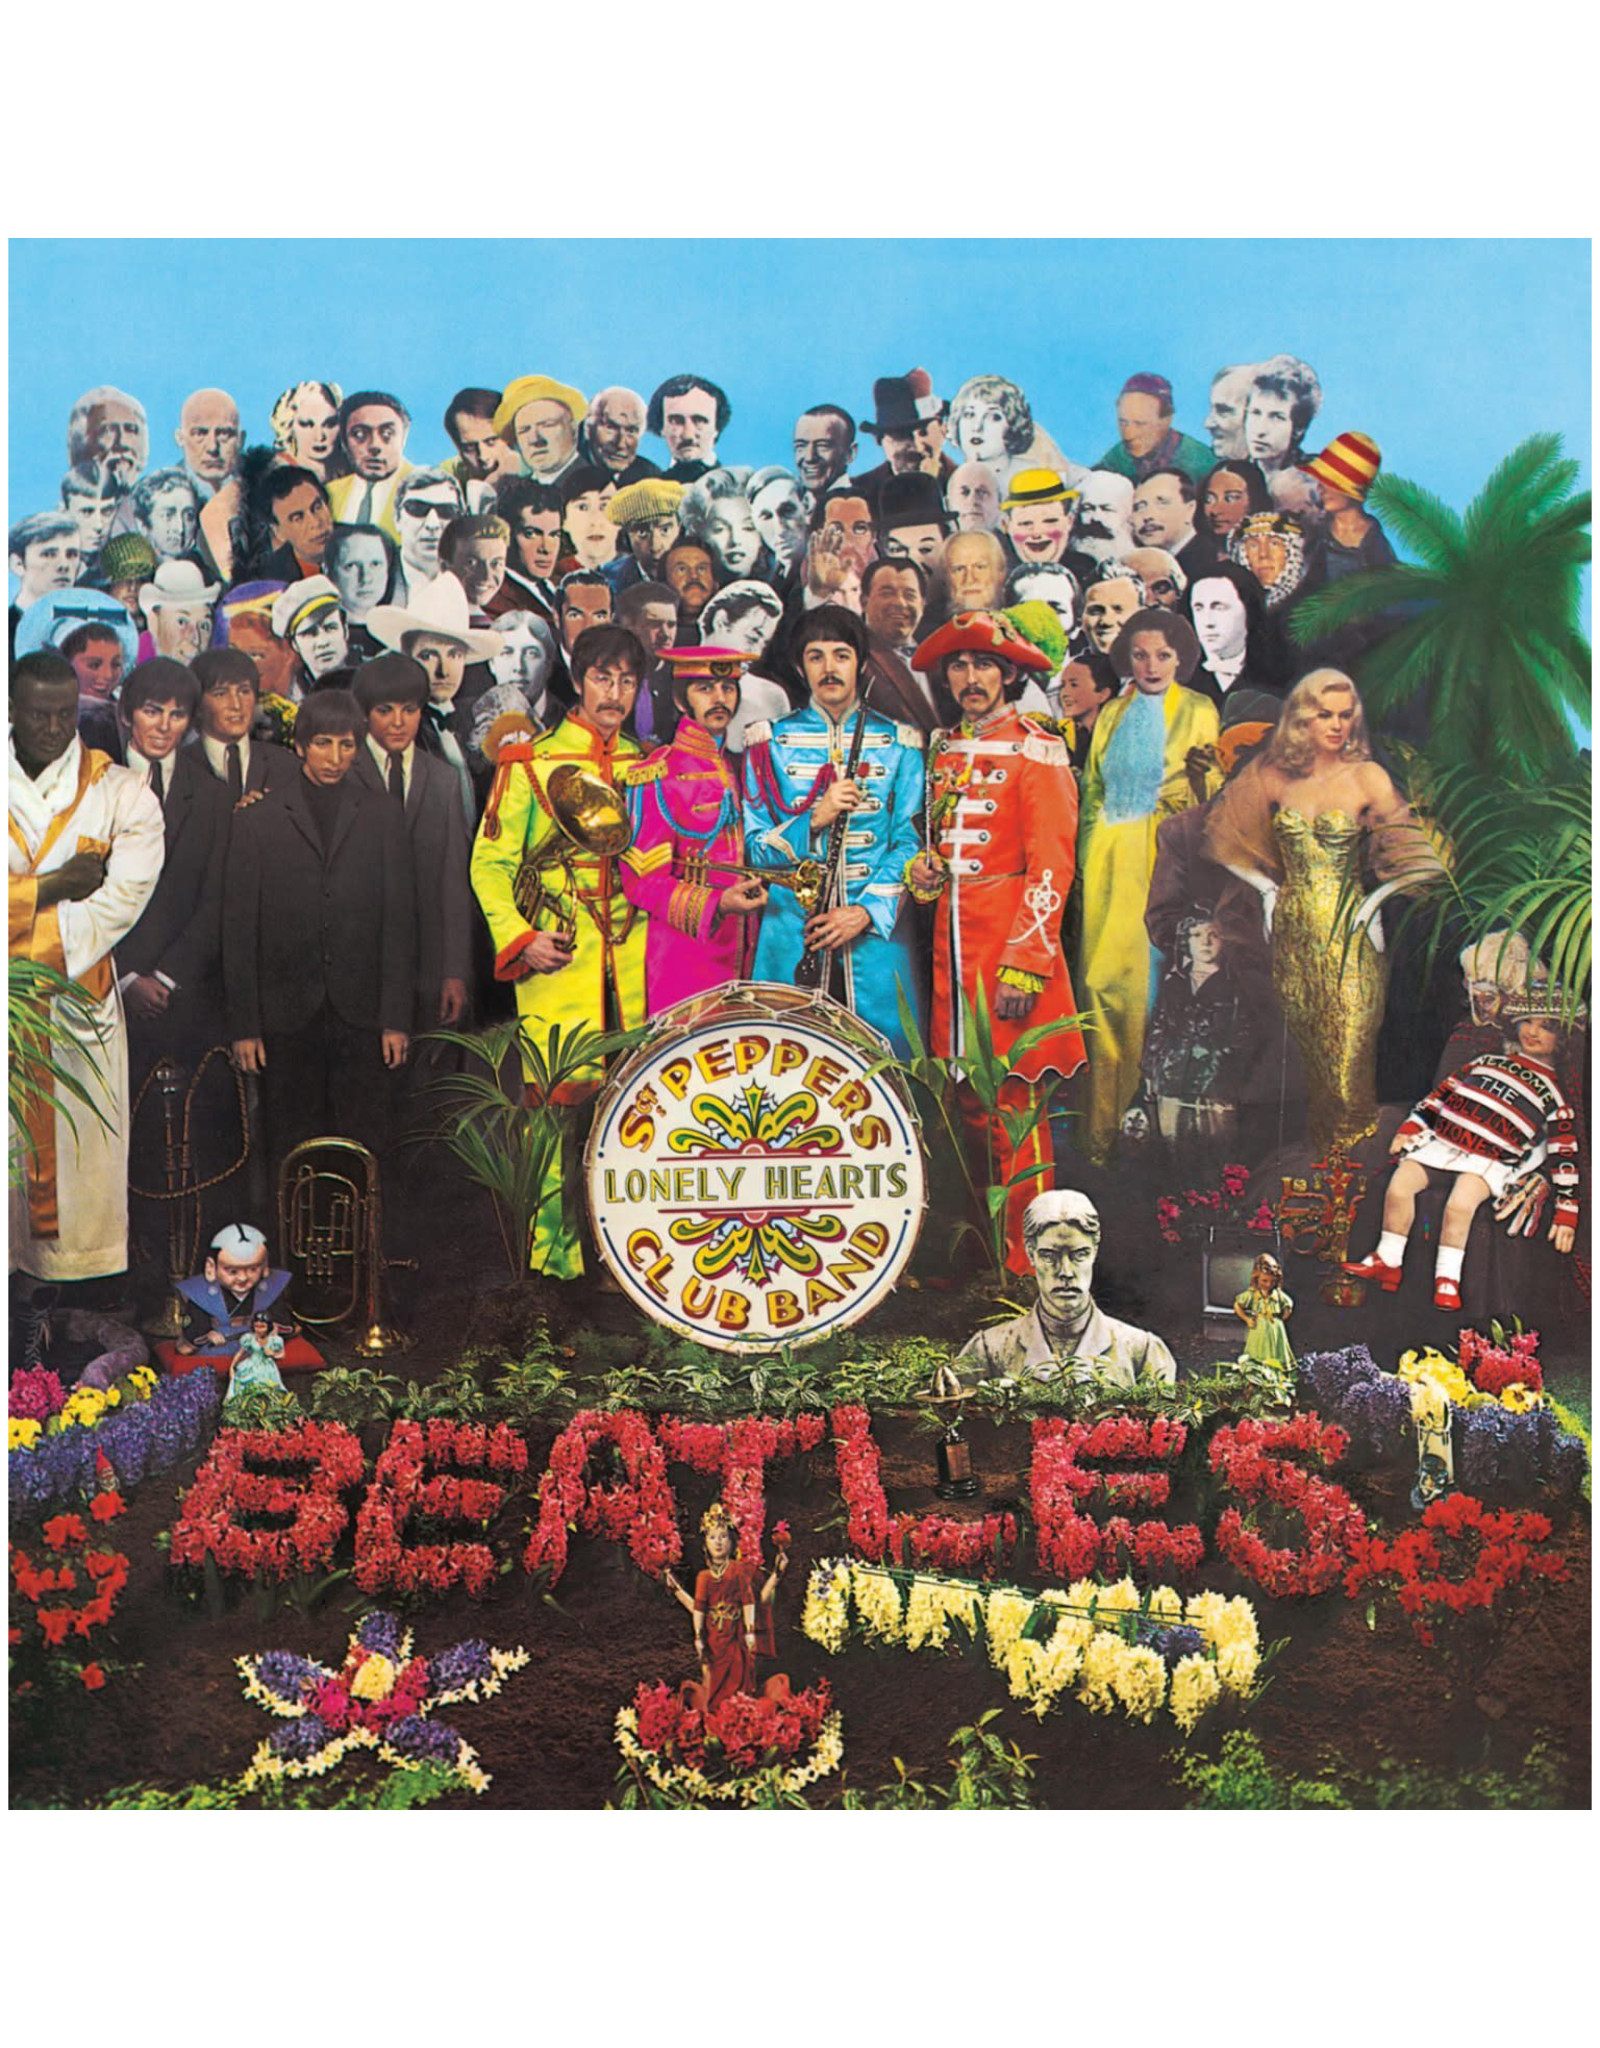 Capitol Beatles: Sgt. Pepper's Lonely Hearts Club Band (2017 Mix) LP